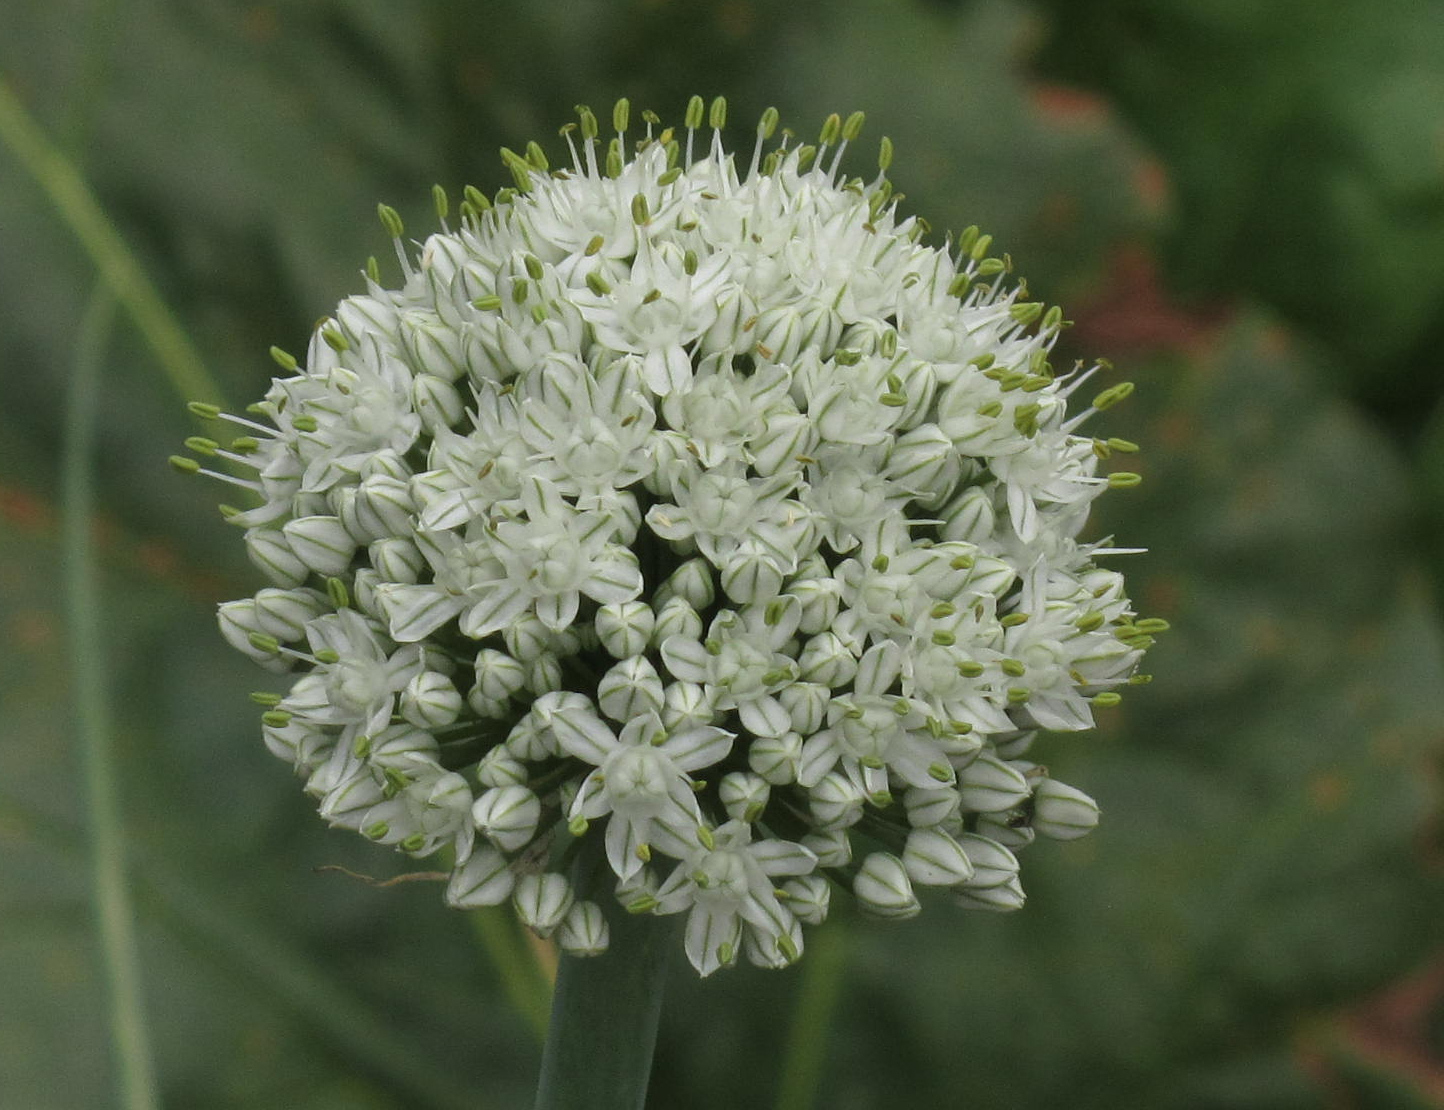 Close-up-flower-of-Onion